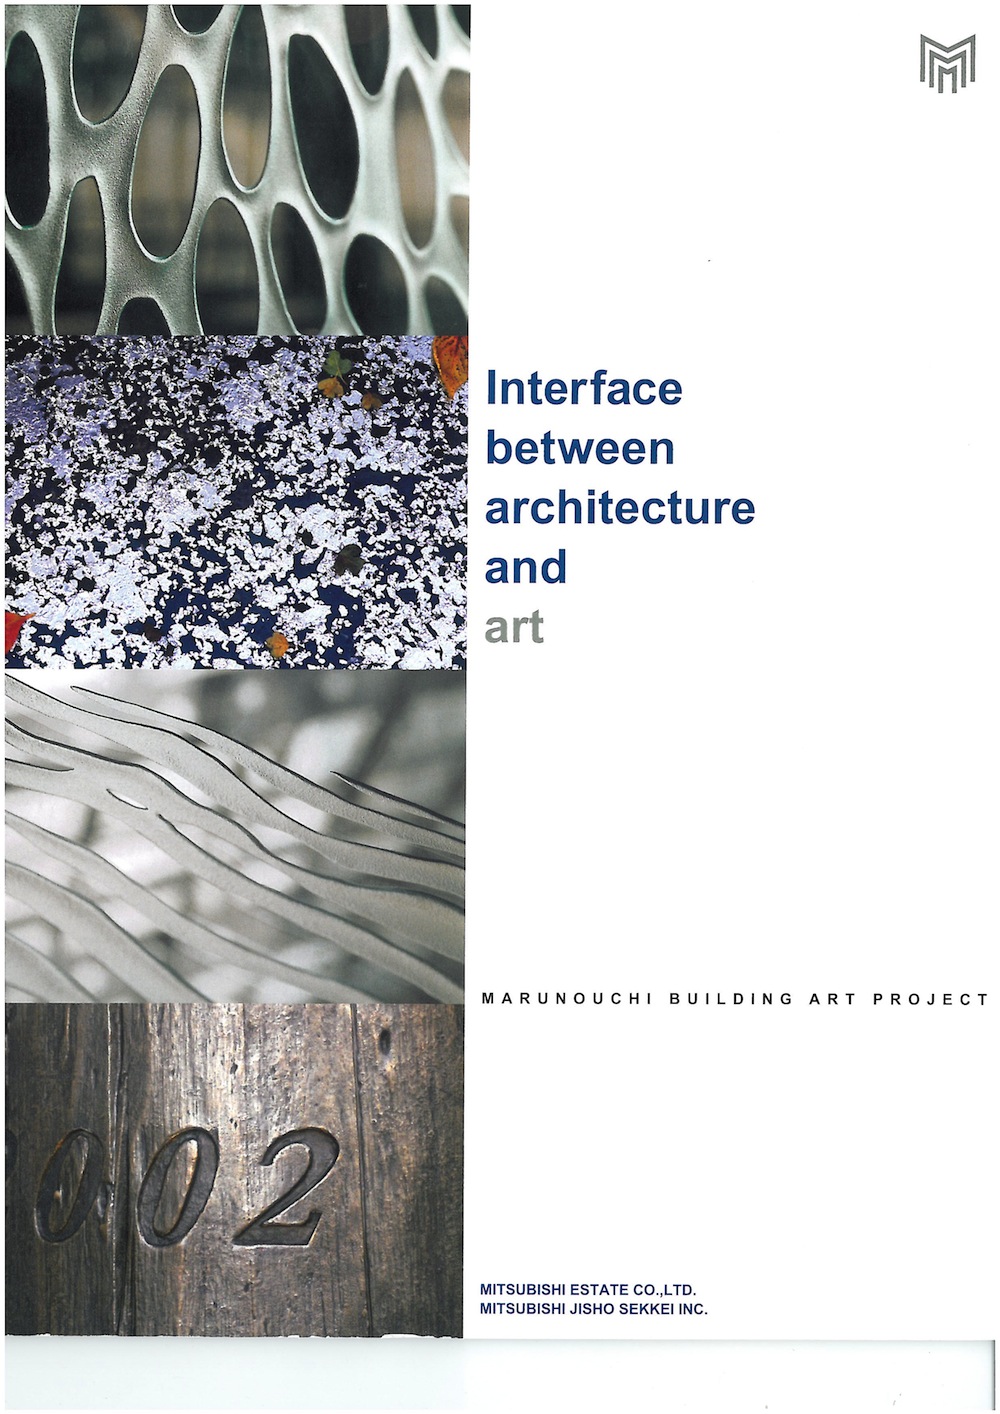 interface between architecture and art 「建築とアートのインターフェース」